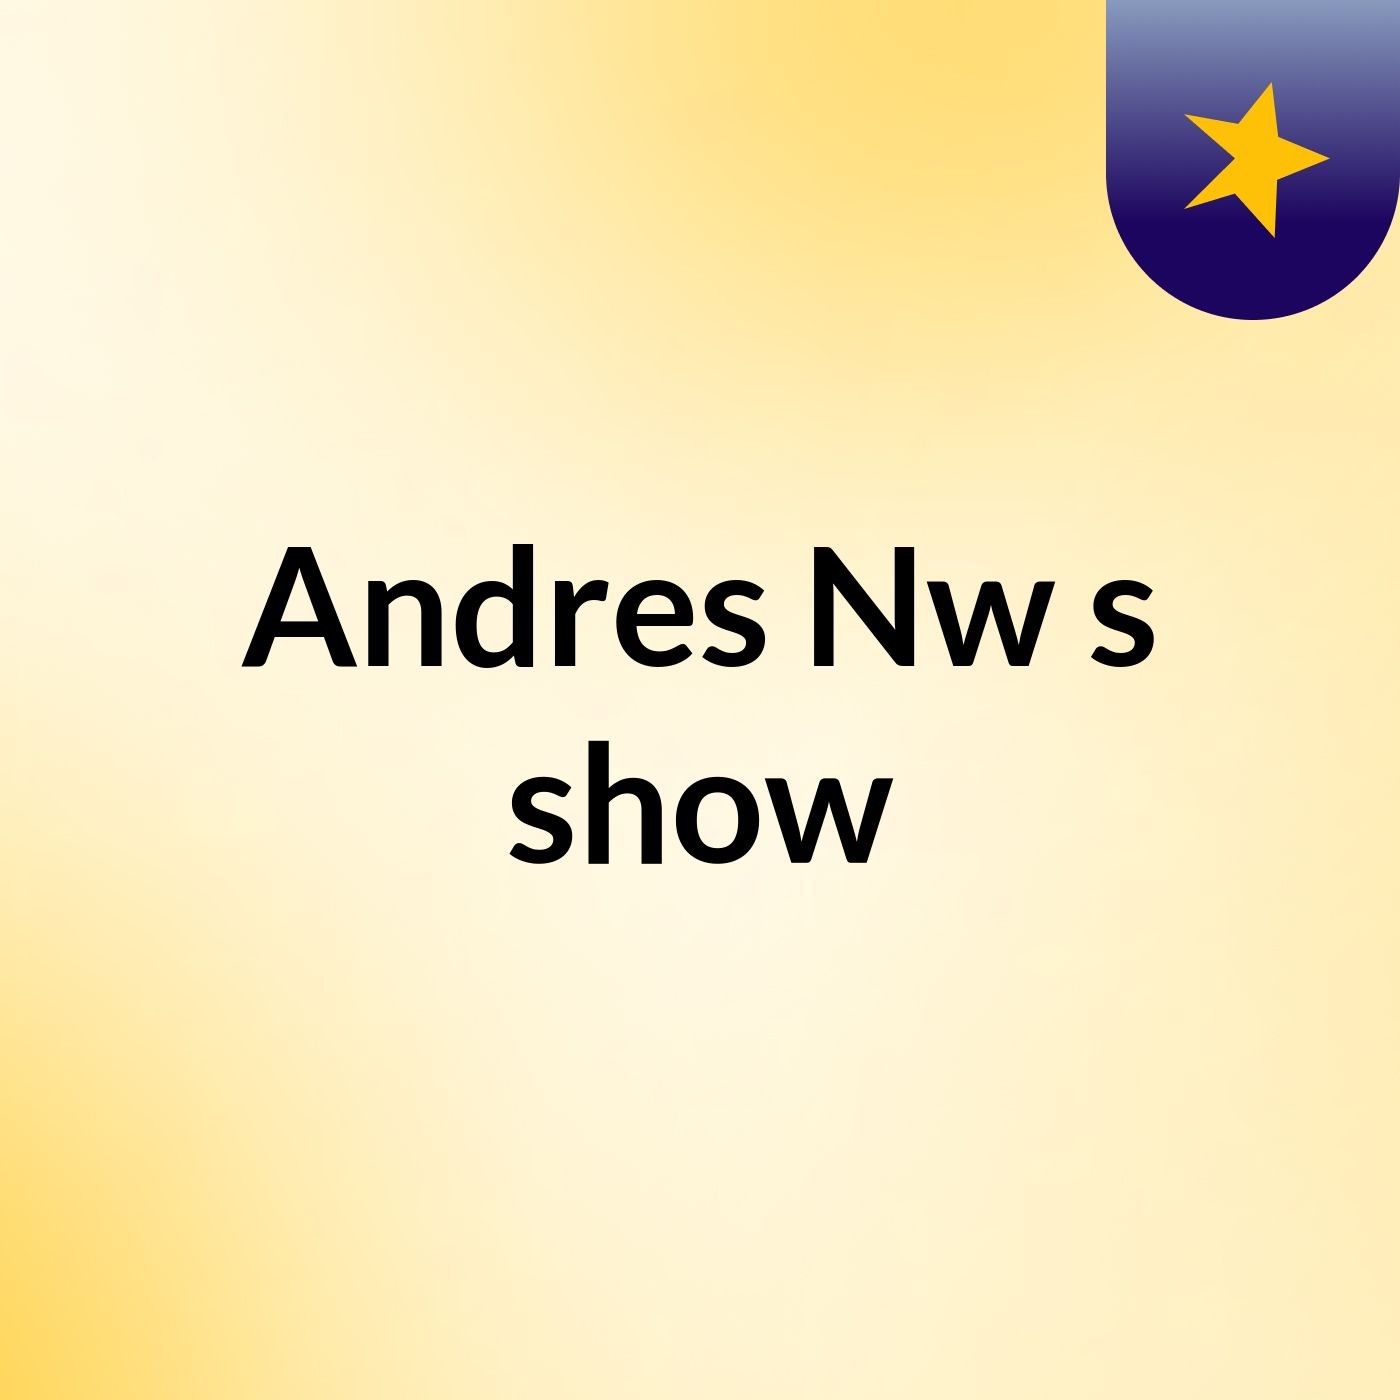 Andres Nw's show